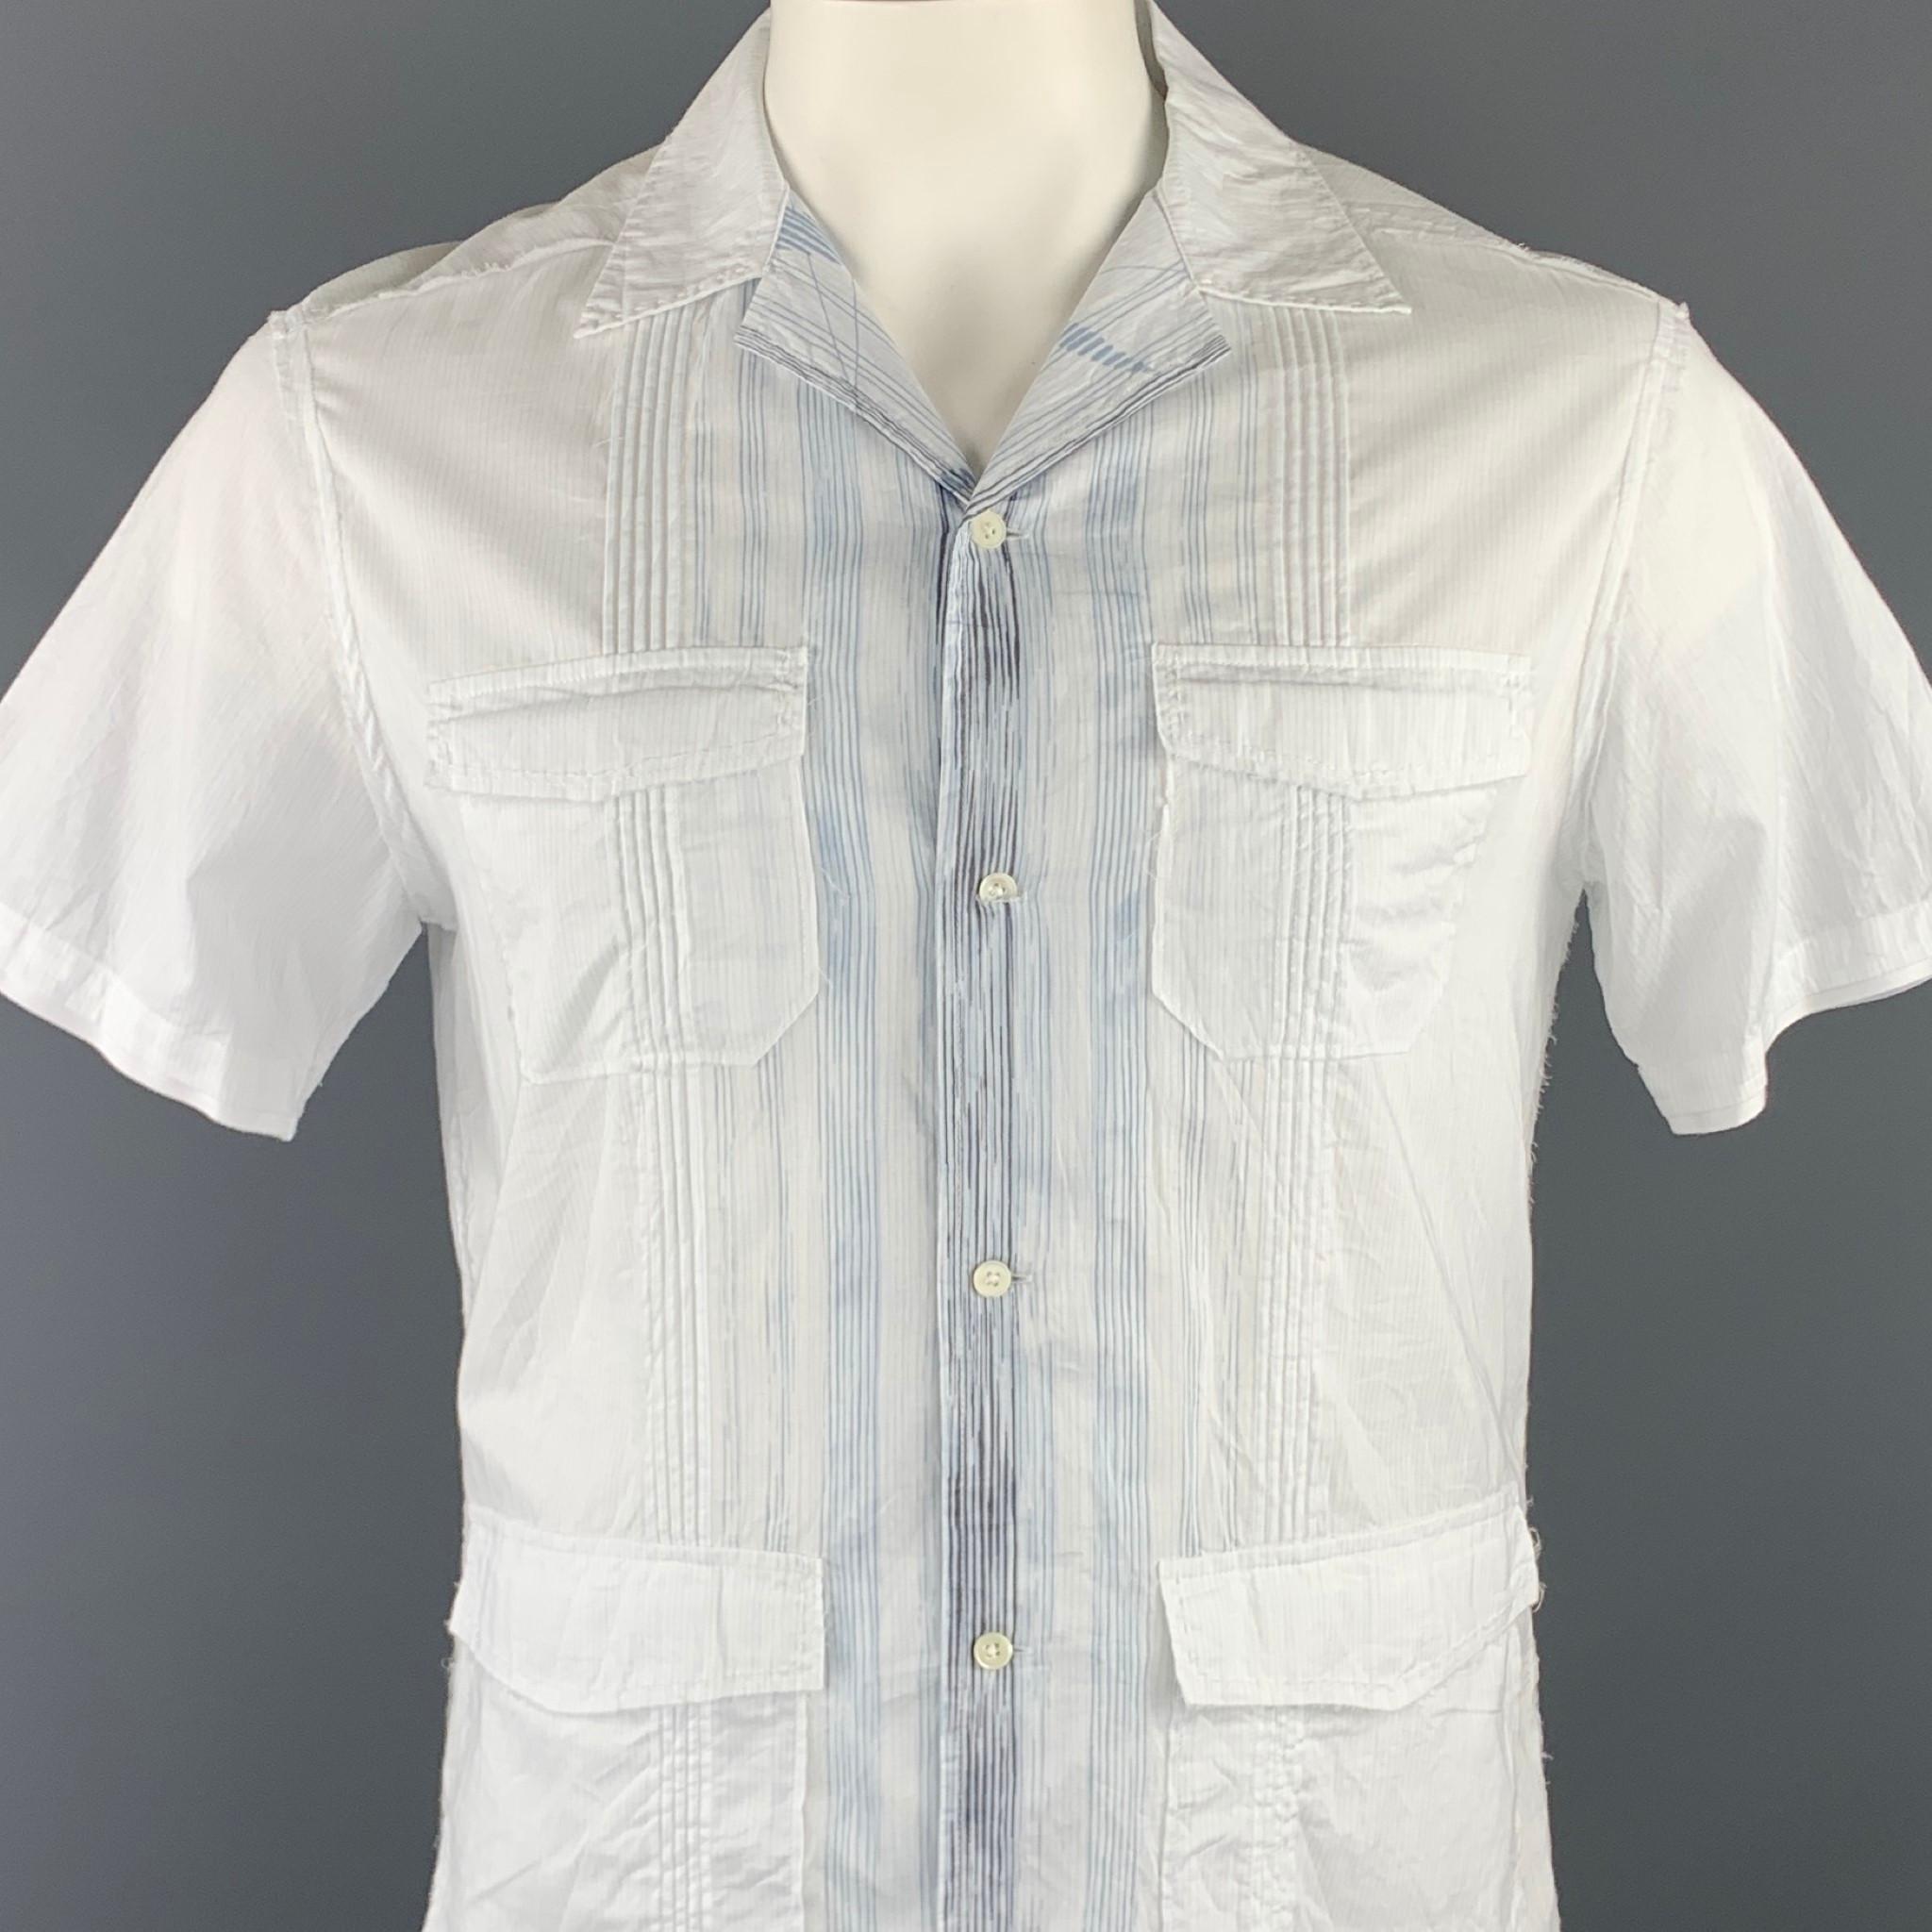 ELIE TAHARI short sleeve shirt comes in a white & blue pinstripe cotton featuring a button up style, patch pockets, contrast stitching, and a spread collar.

Excellent Pre-Owned Condition.
Marked: M

Measurements:

Shoulder: 17 in. 
Chest: 42 in.